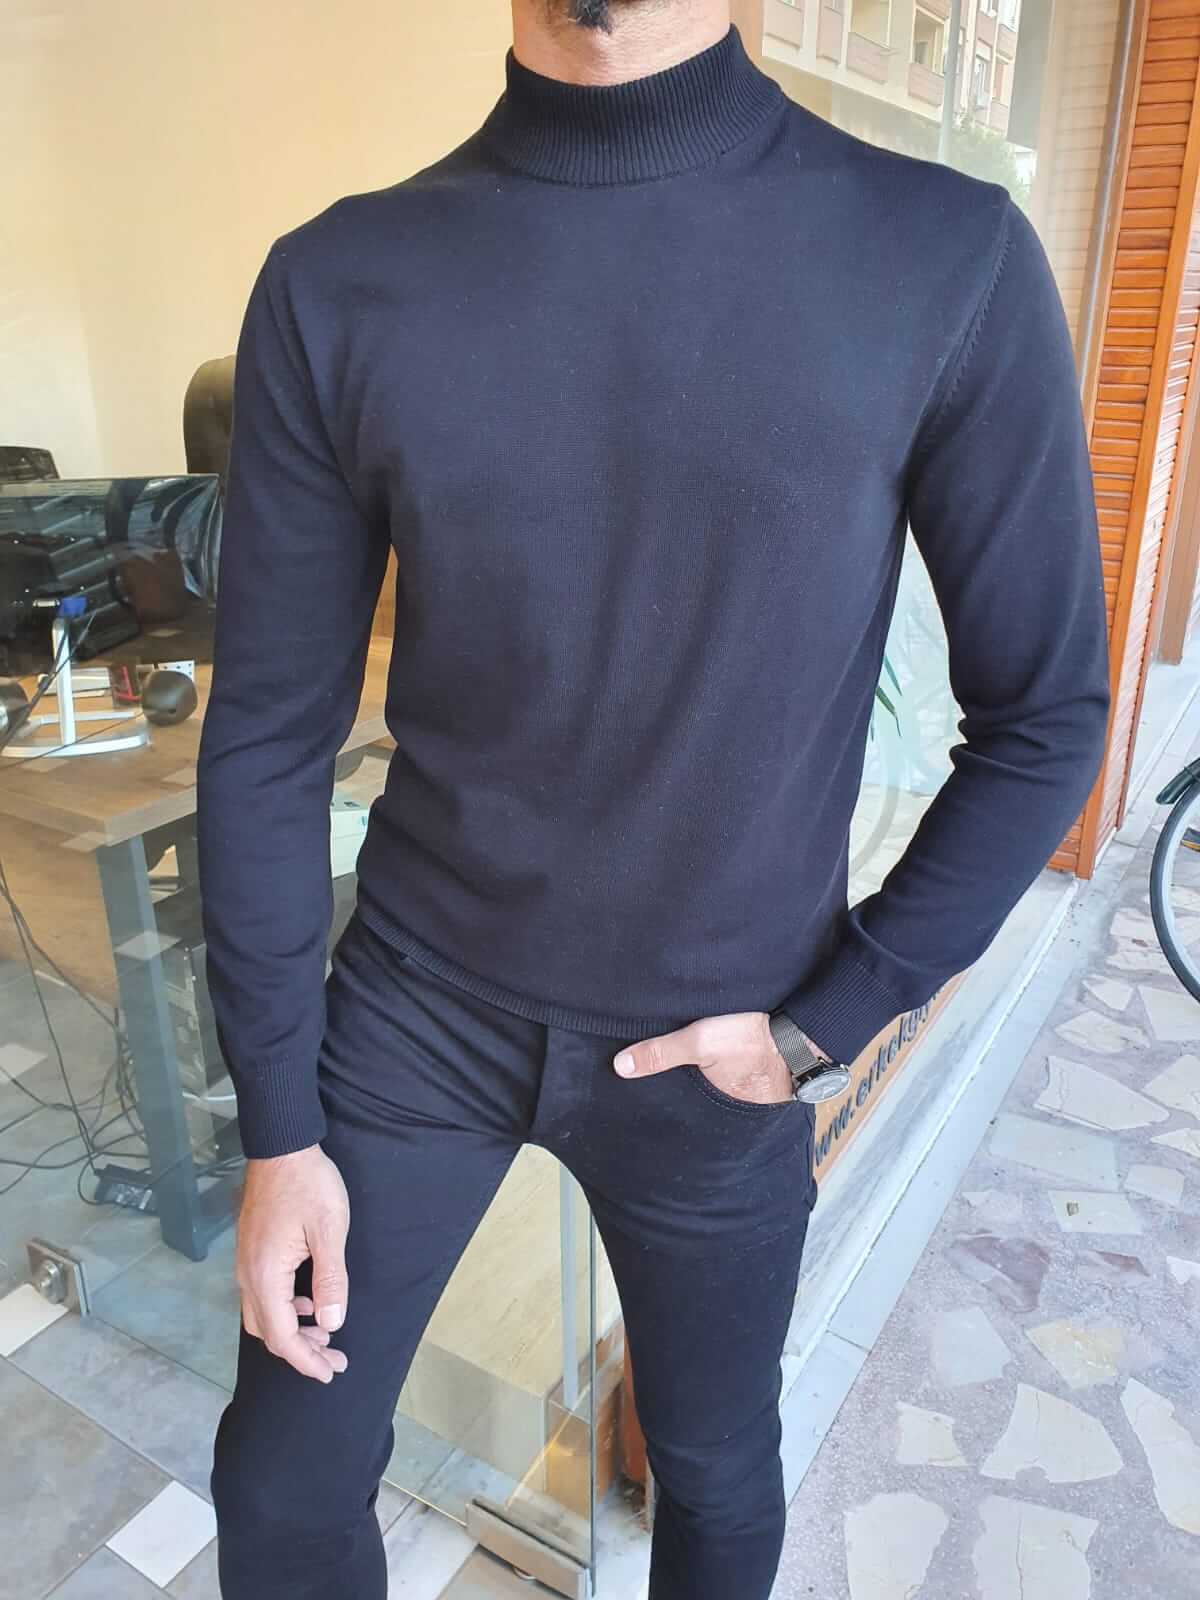 "Vale Black Turtleneck: A sleek and stylish black turtleneck sweater made from soft, high-quality fabric.